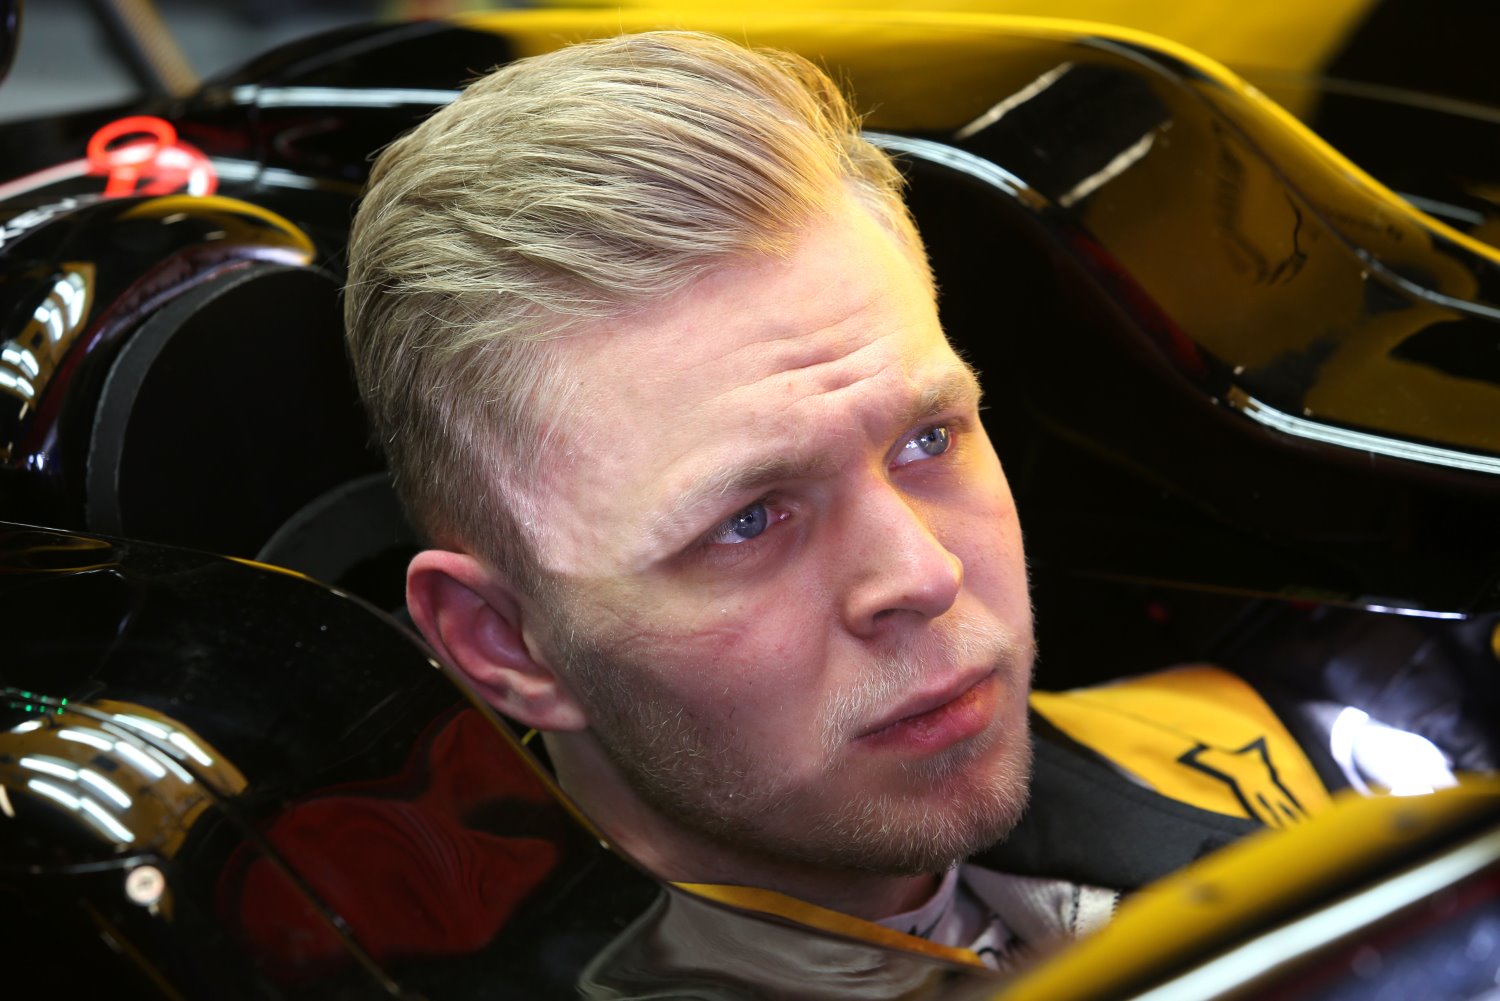 Kevin Magnussen excluded from quals today